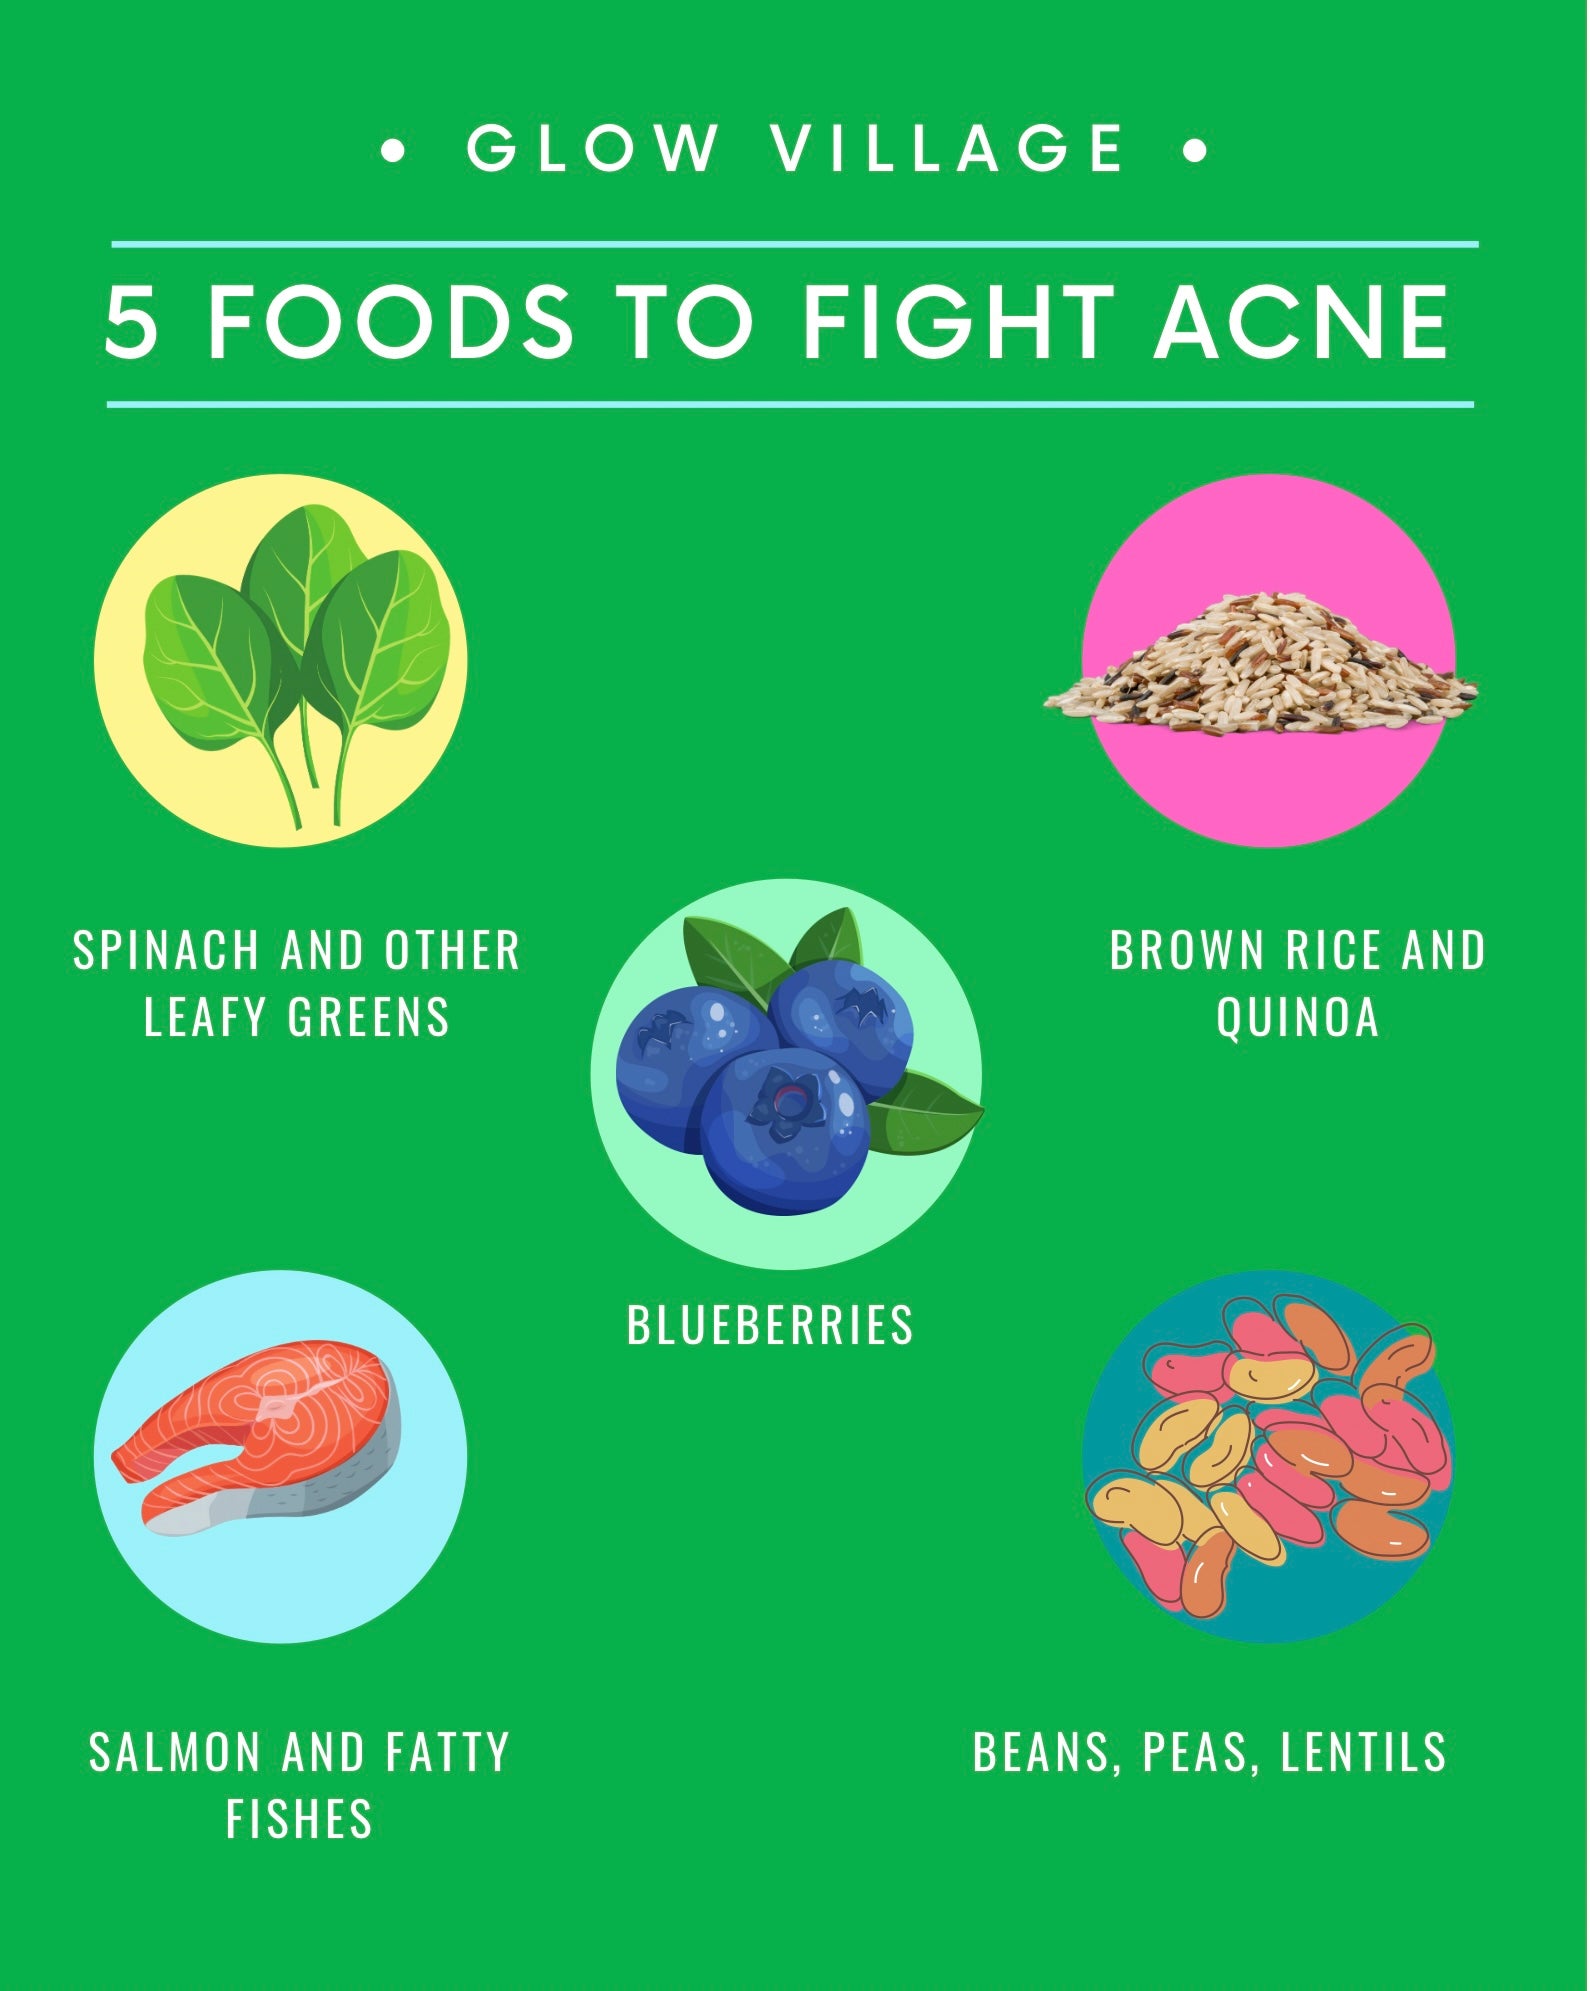 5 Foods to fight Acne